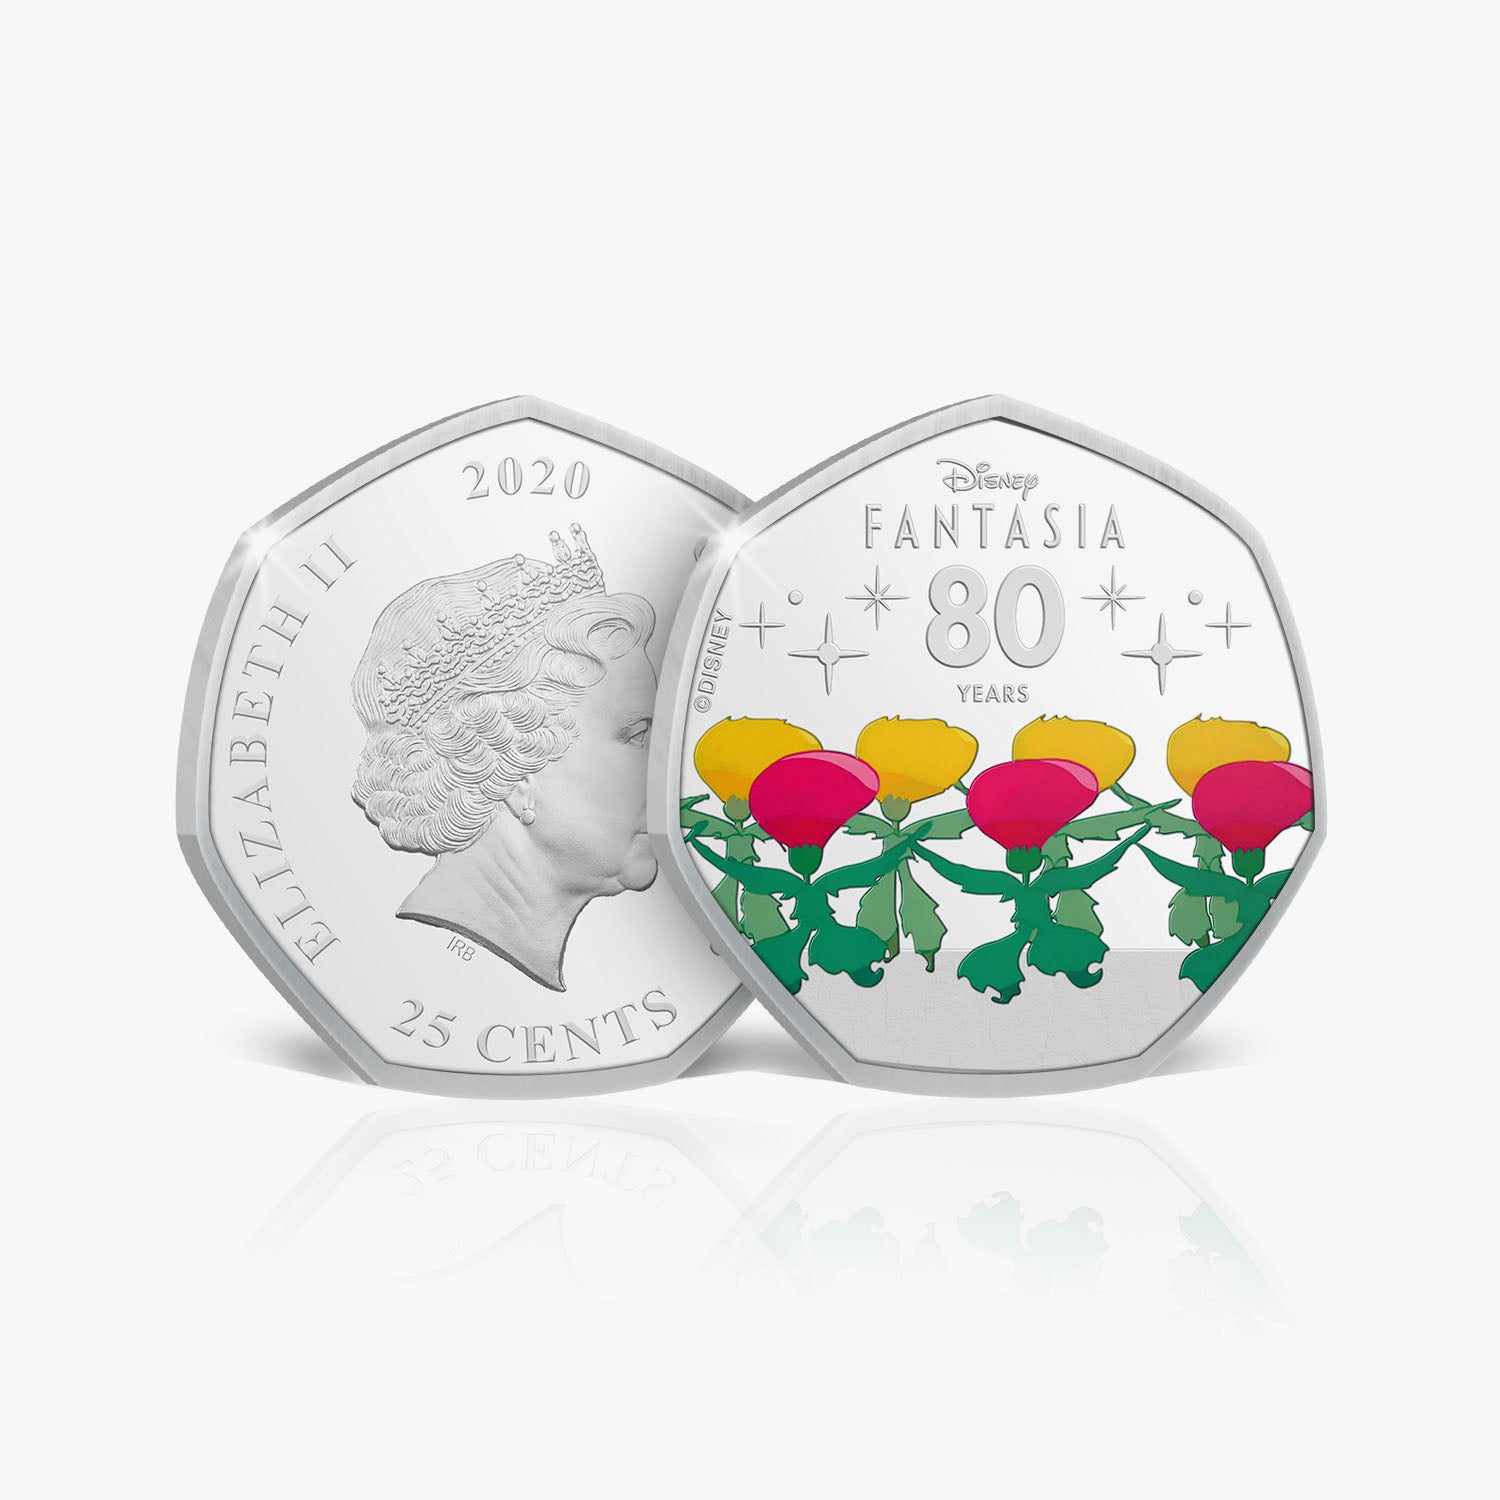 Nutcracker Suite Silver Plated Coin